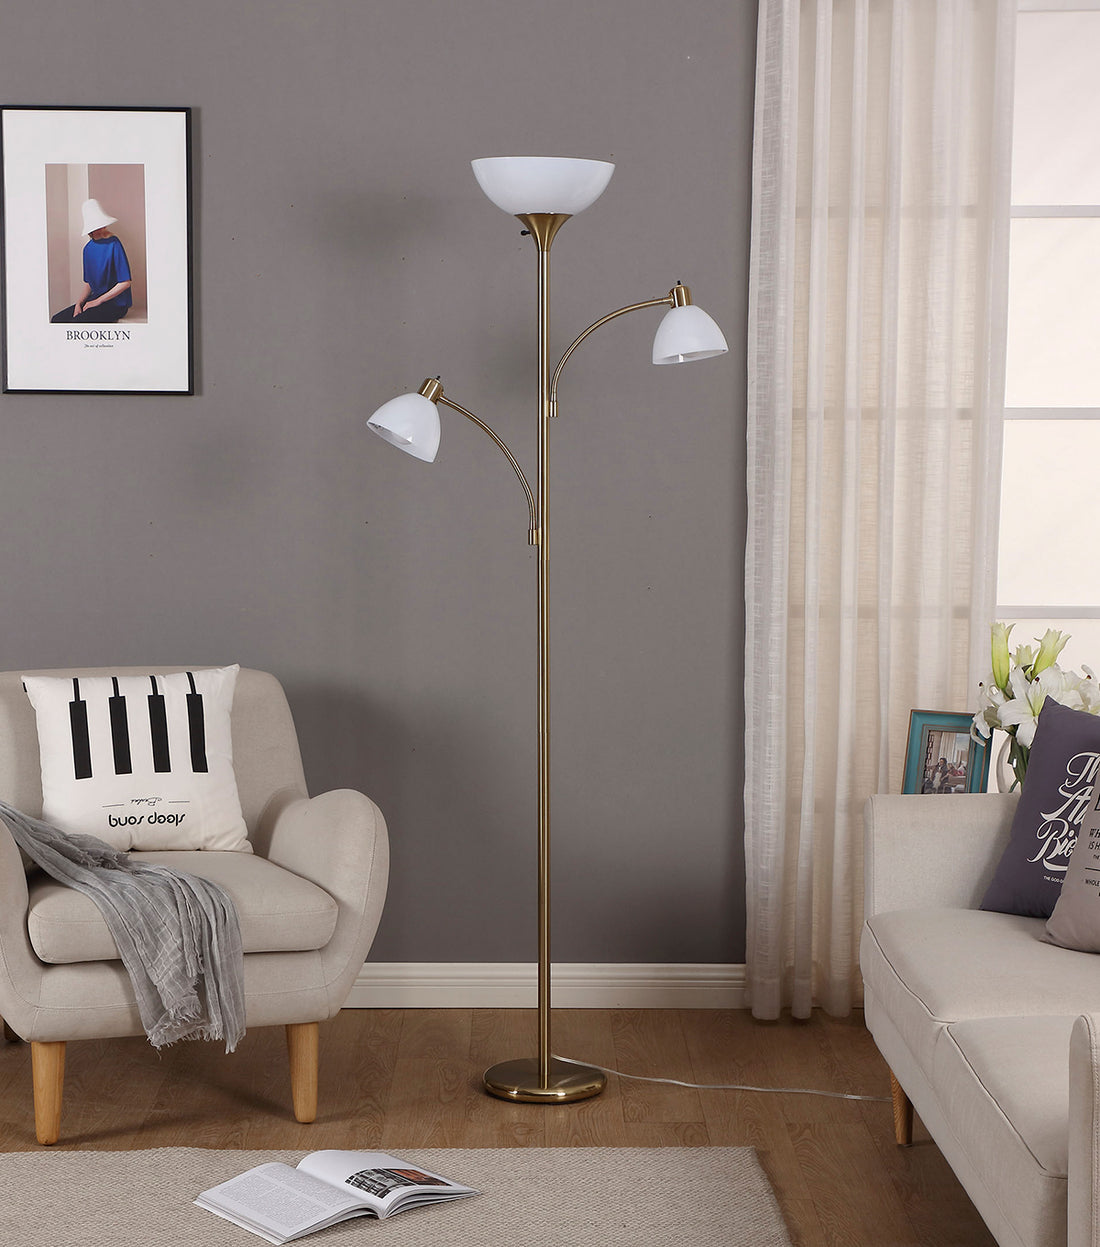 Brightech Sky Dome Double – High Brightness Torchiere Floor Lamp with 2 Reading Lights for Living Rooms, Bedrooms – Replace Halogen Standing Lamps with Efficient LED Office Lighting